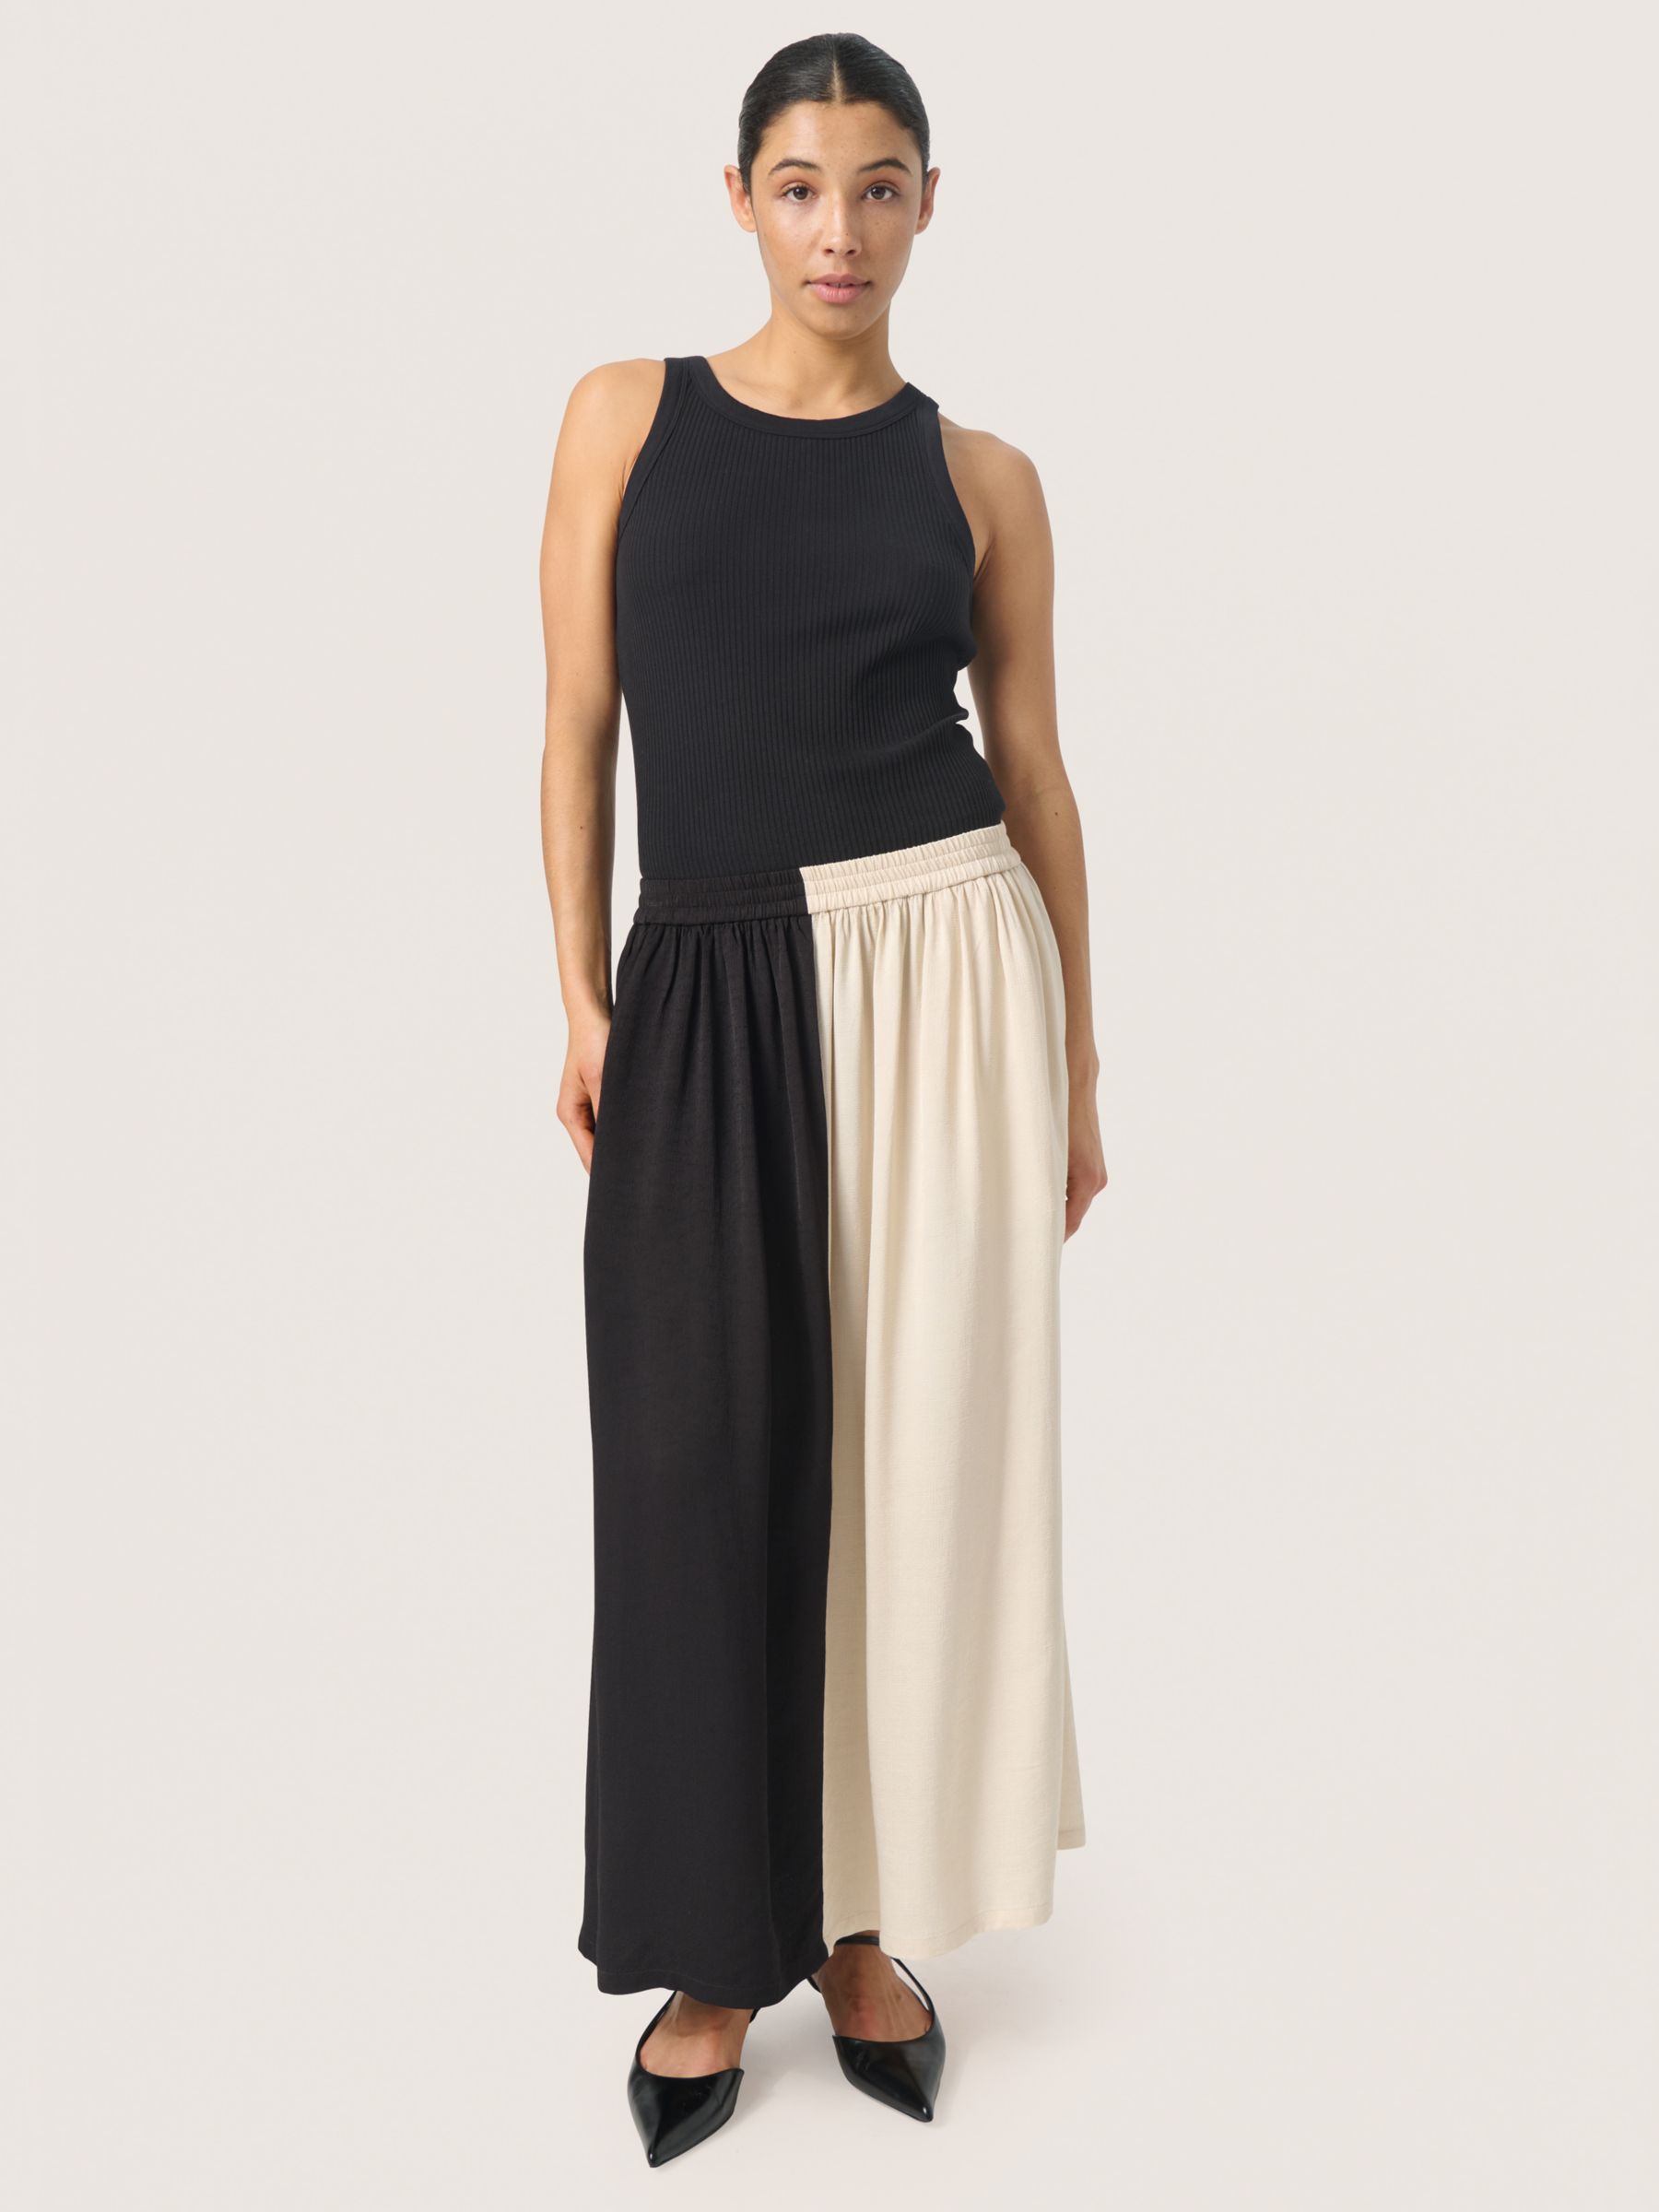 Buy Soaked In Luxury Cevina Two Tone A-Line Maxi Skirt, Black/White Online at johnlewis.com